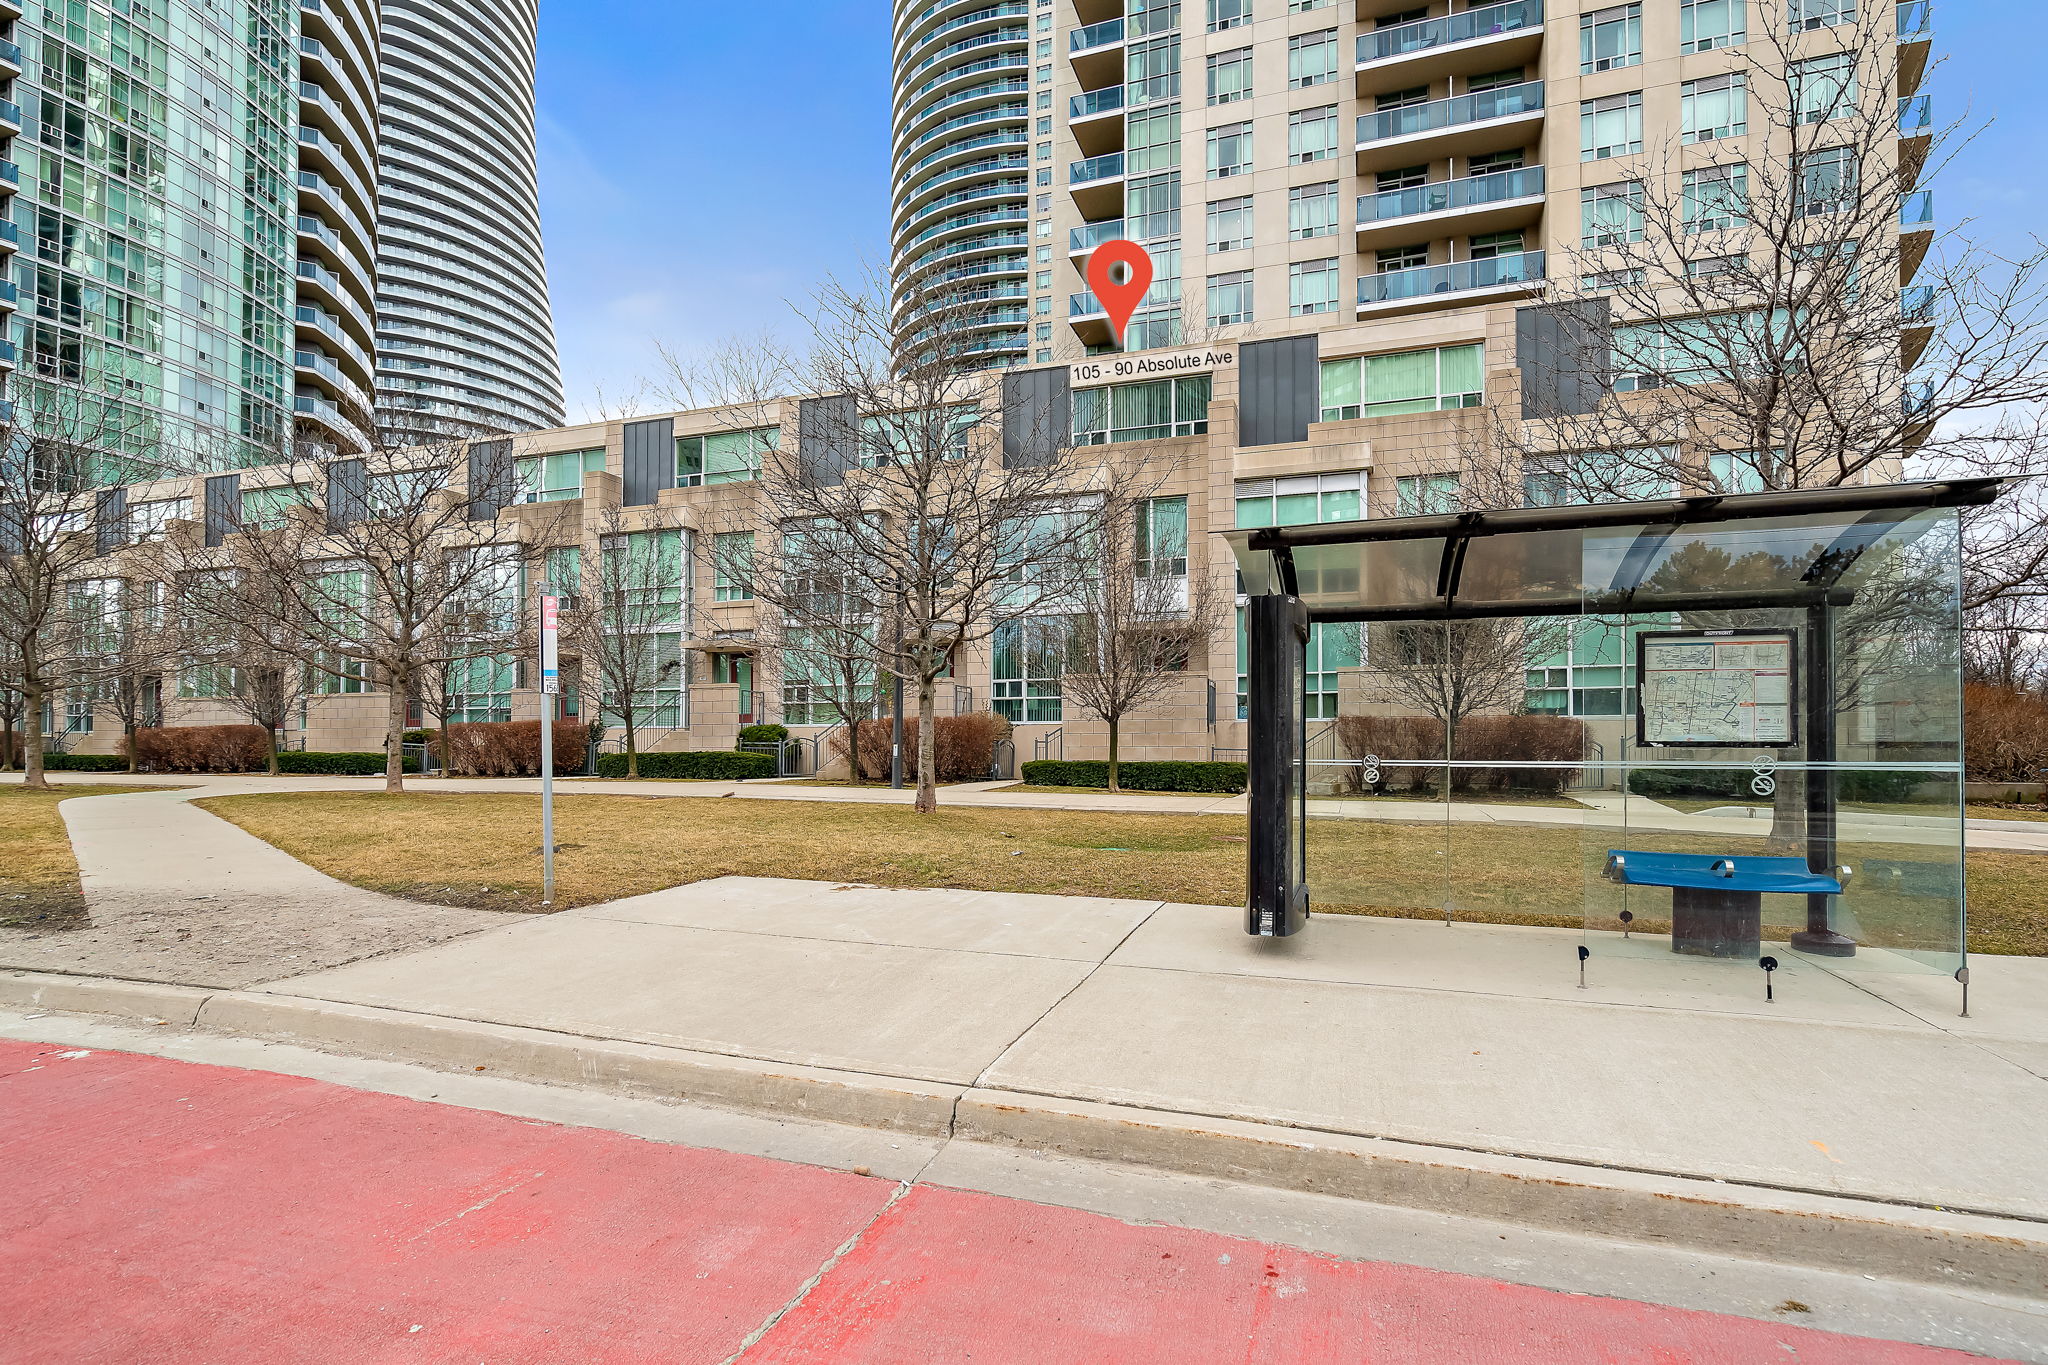  90 Absolute Ave Unit 105, Mississauga, ON L4Z 0A3, US Photo 41